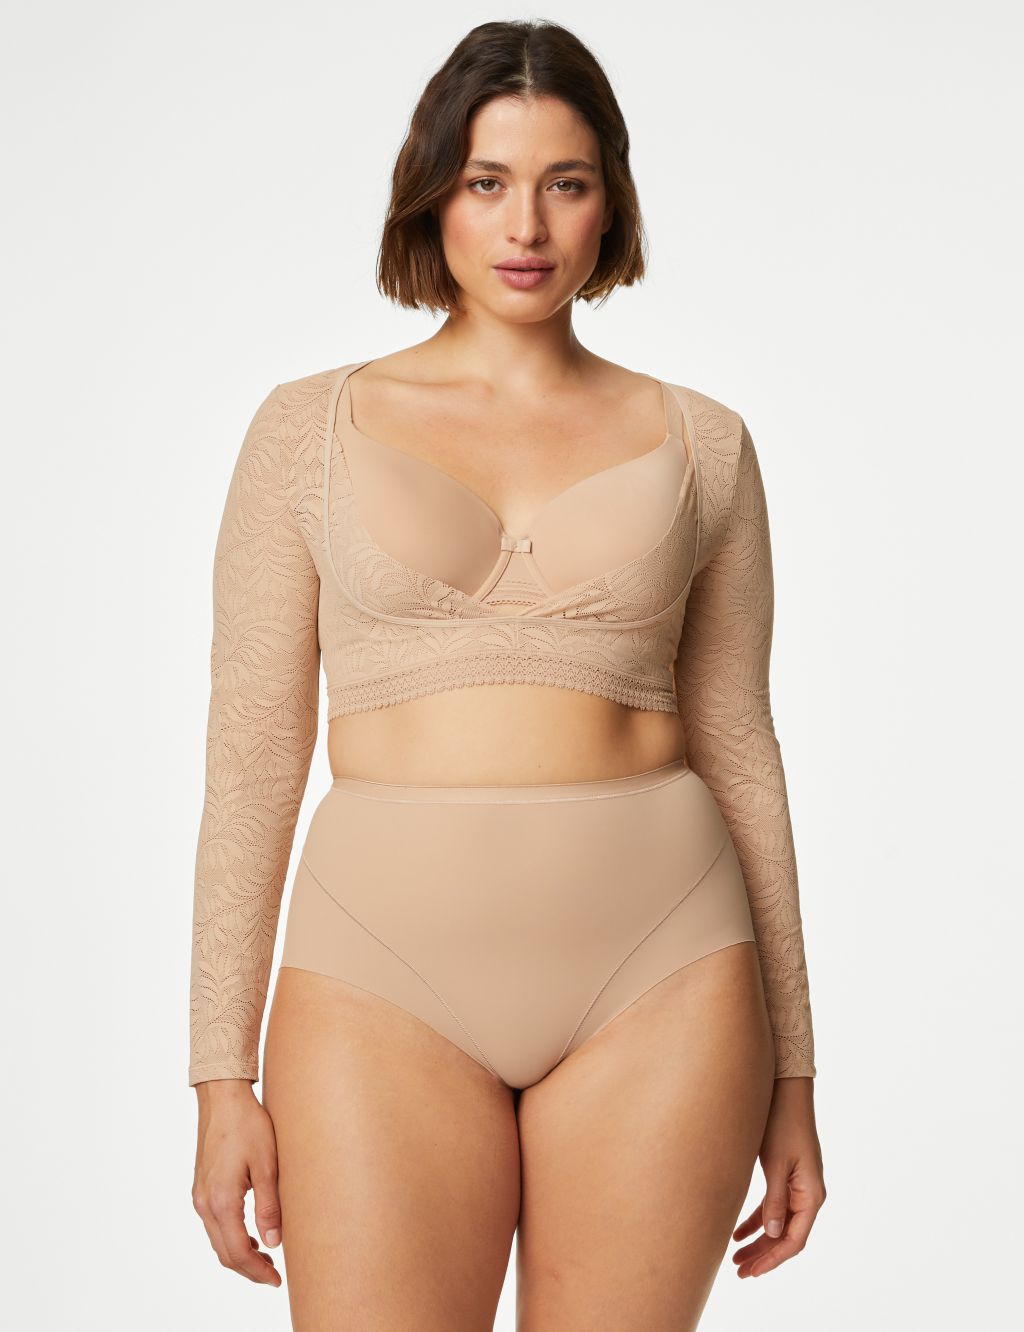 Home - Mims Body Shaper